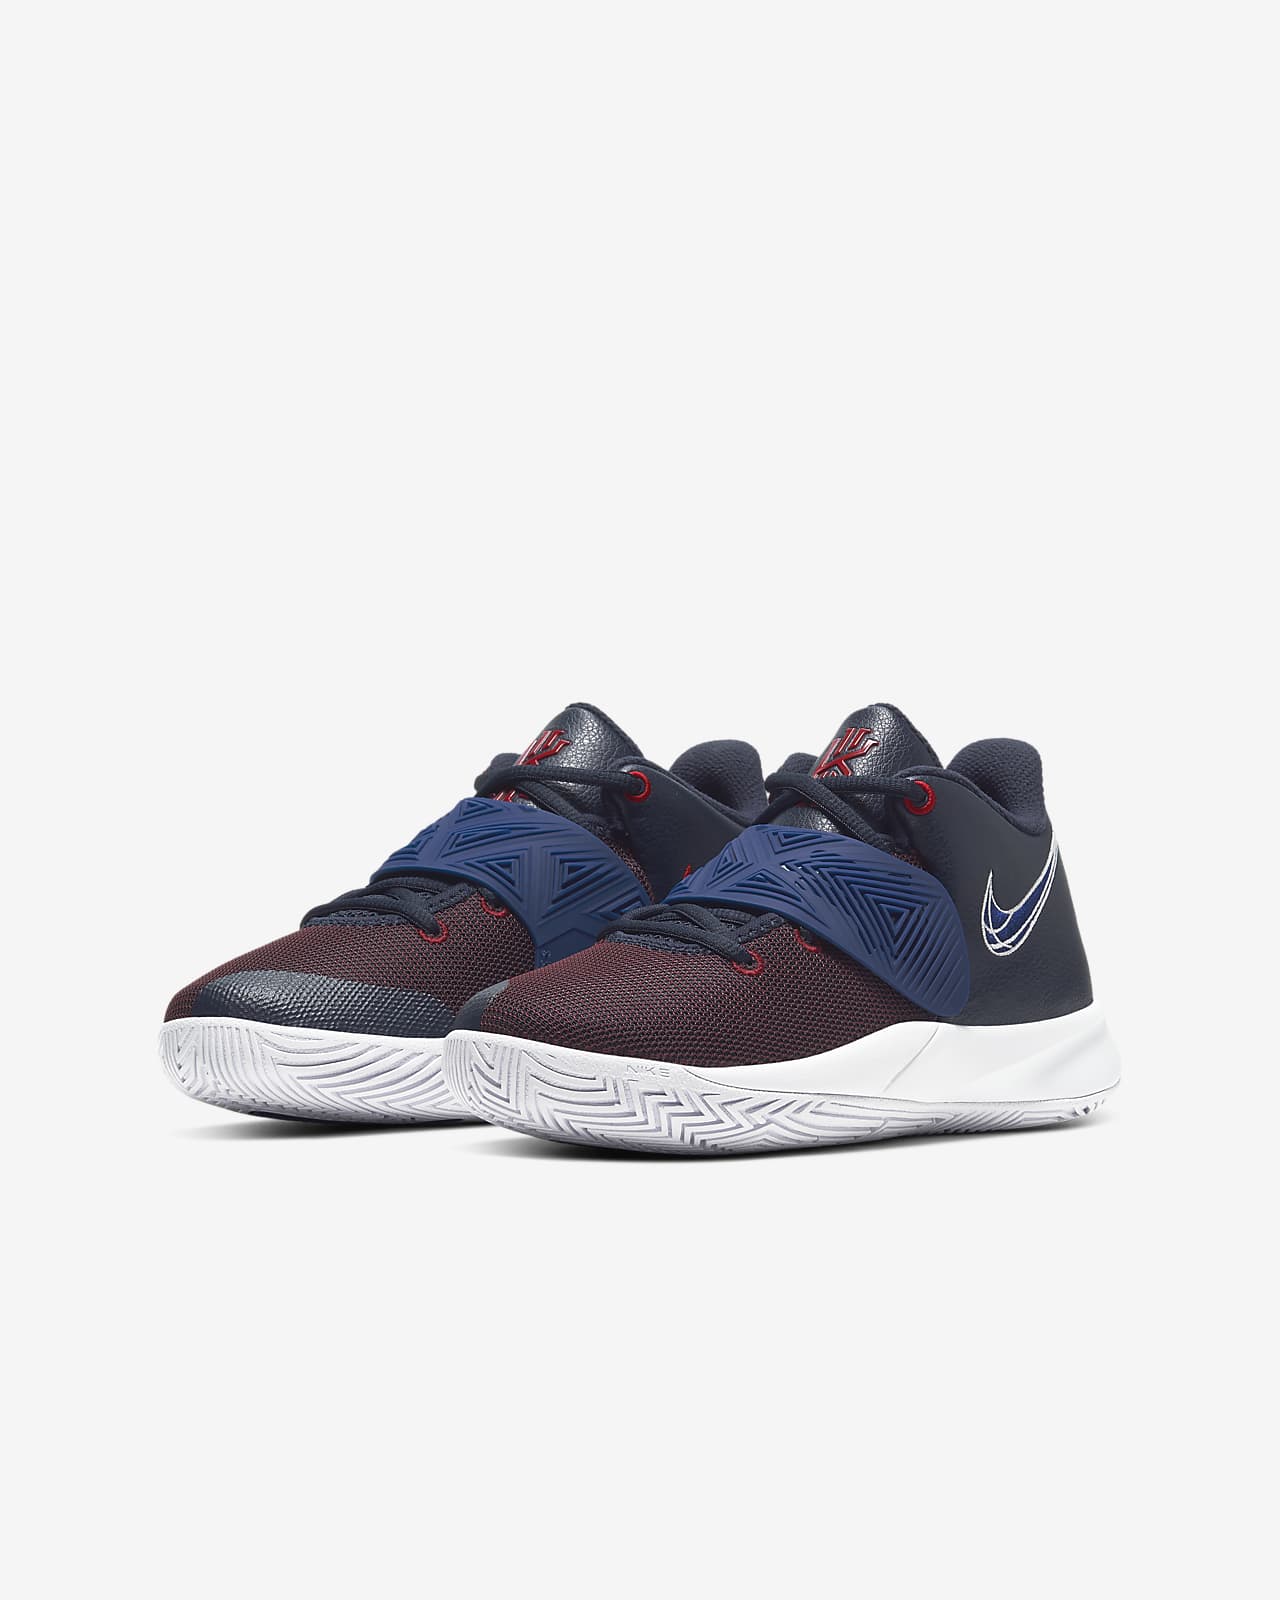 kyrie flytrap 3 youth